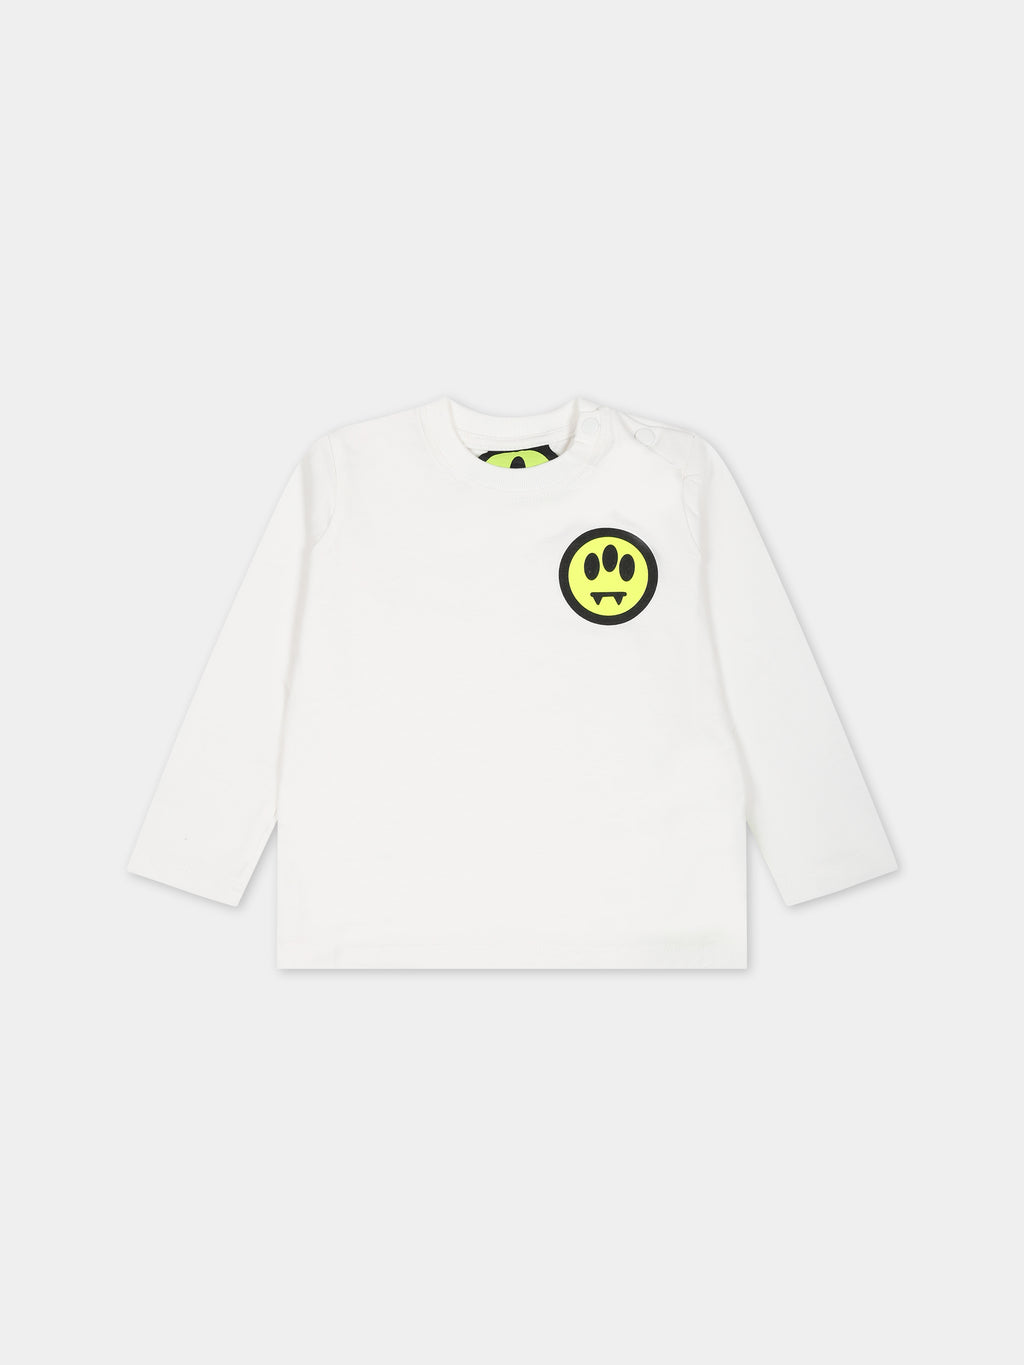 White t-shirt for baby kids with logo and smiley